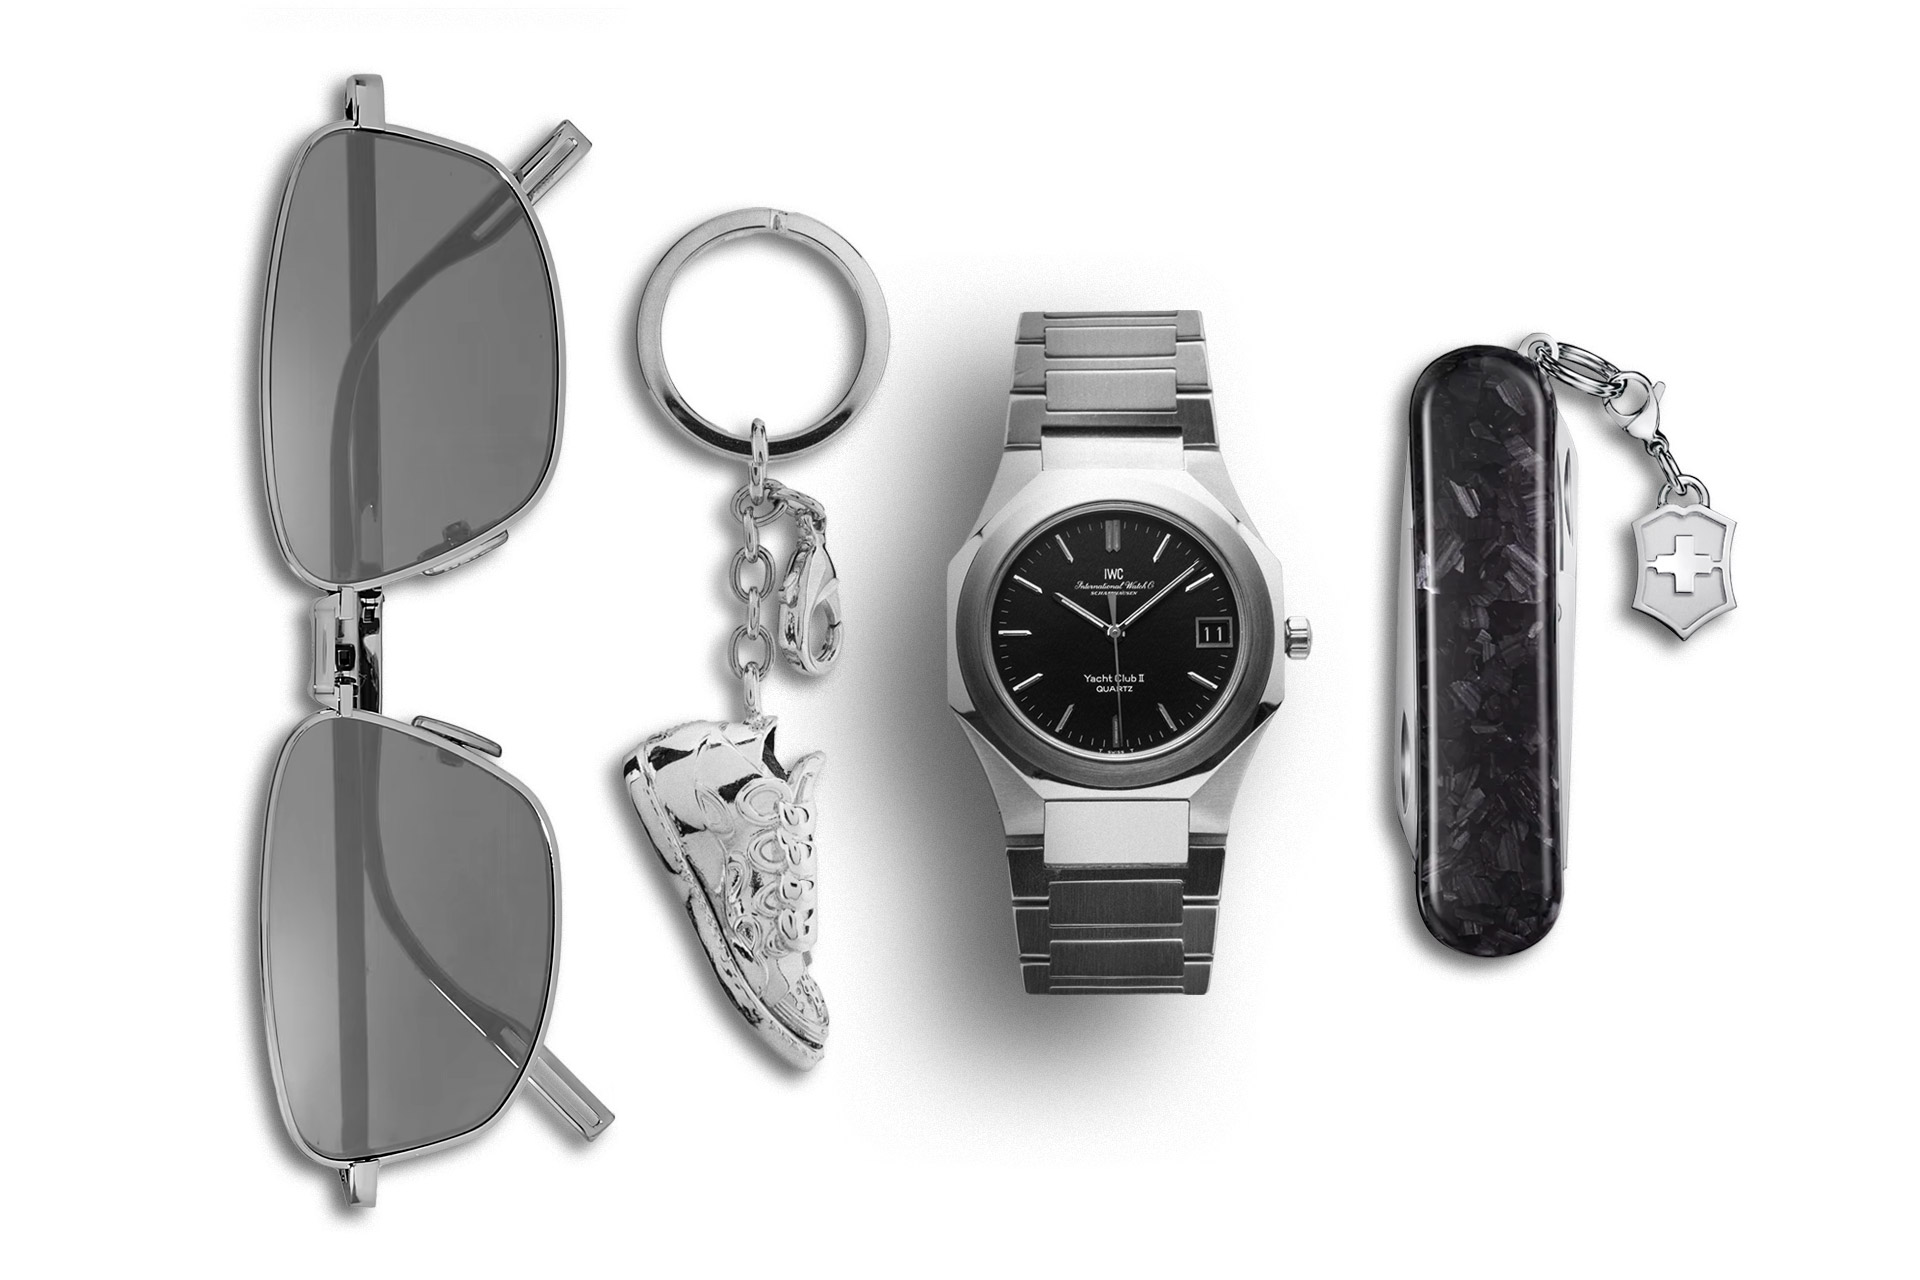 Everyday Carry: Charm | Uncrate, #Everyday #Carry #Charm #Uncrate